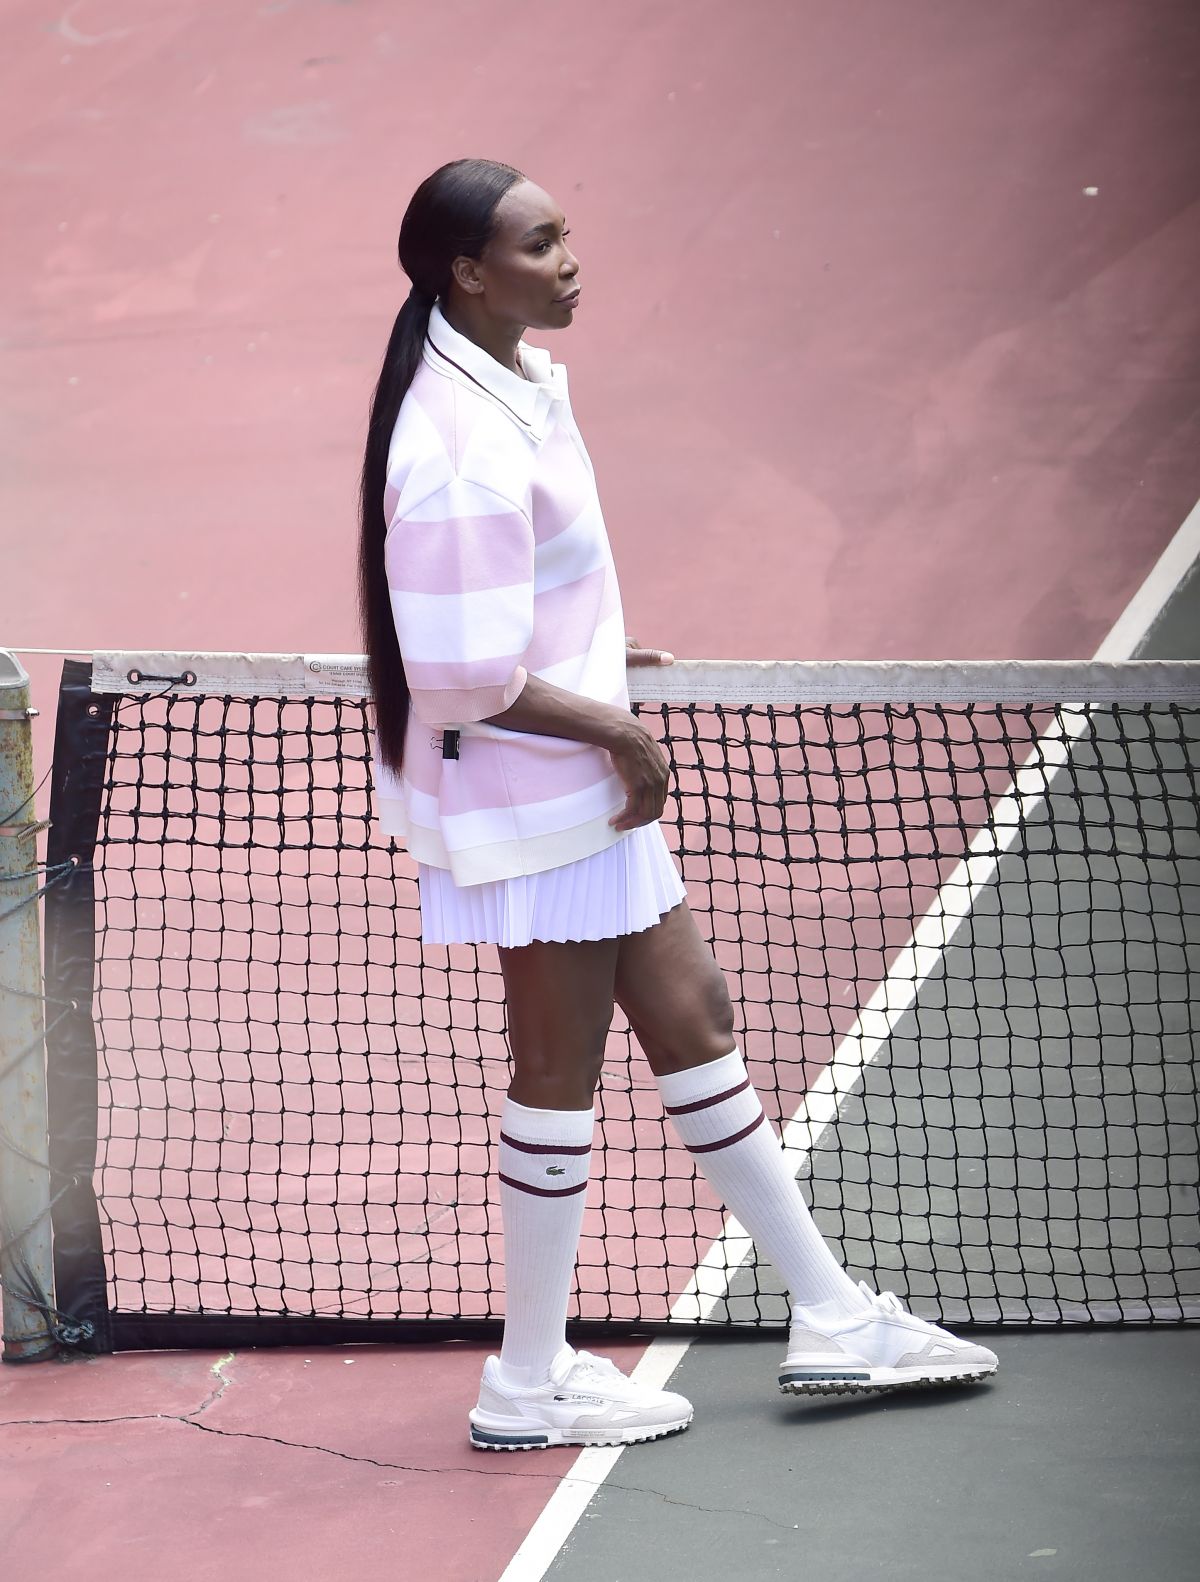 Venus Williams at a Photoshoot in New York